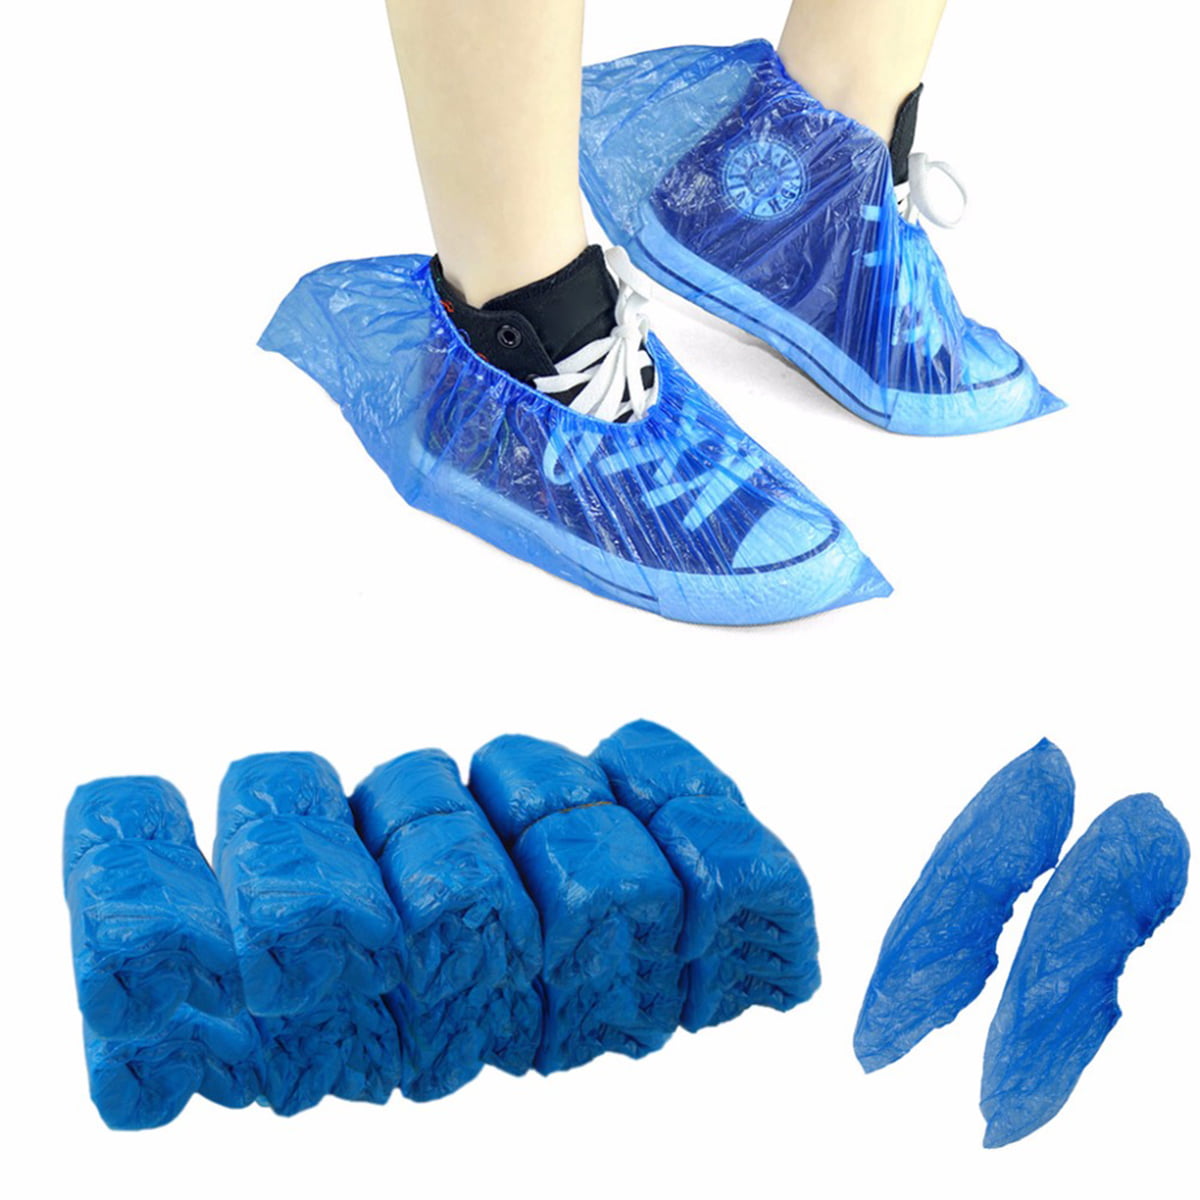 200 PCS Medical Waterproof Boot Covers Plastic Disposable Shoe Covers Overshoes 